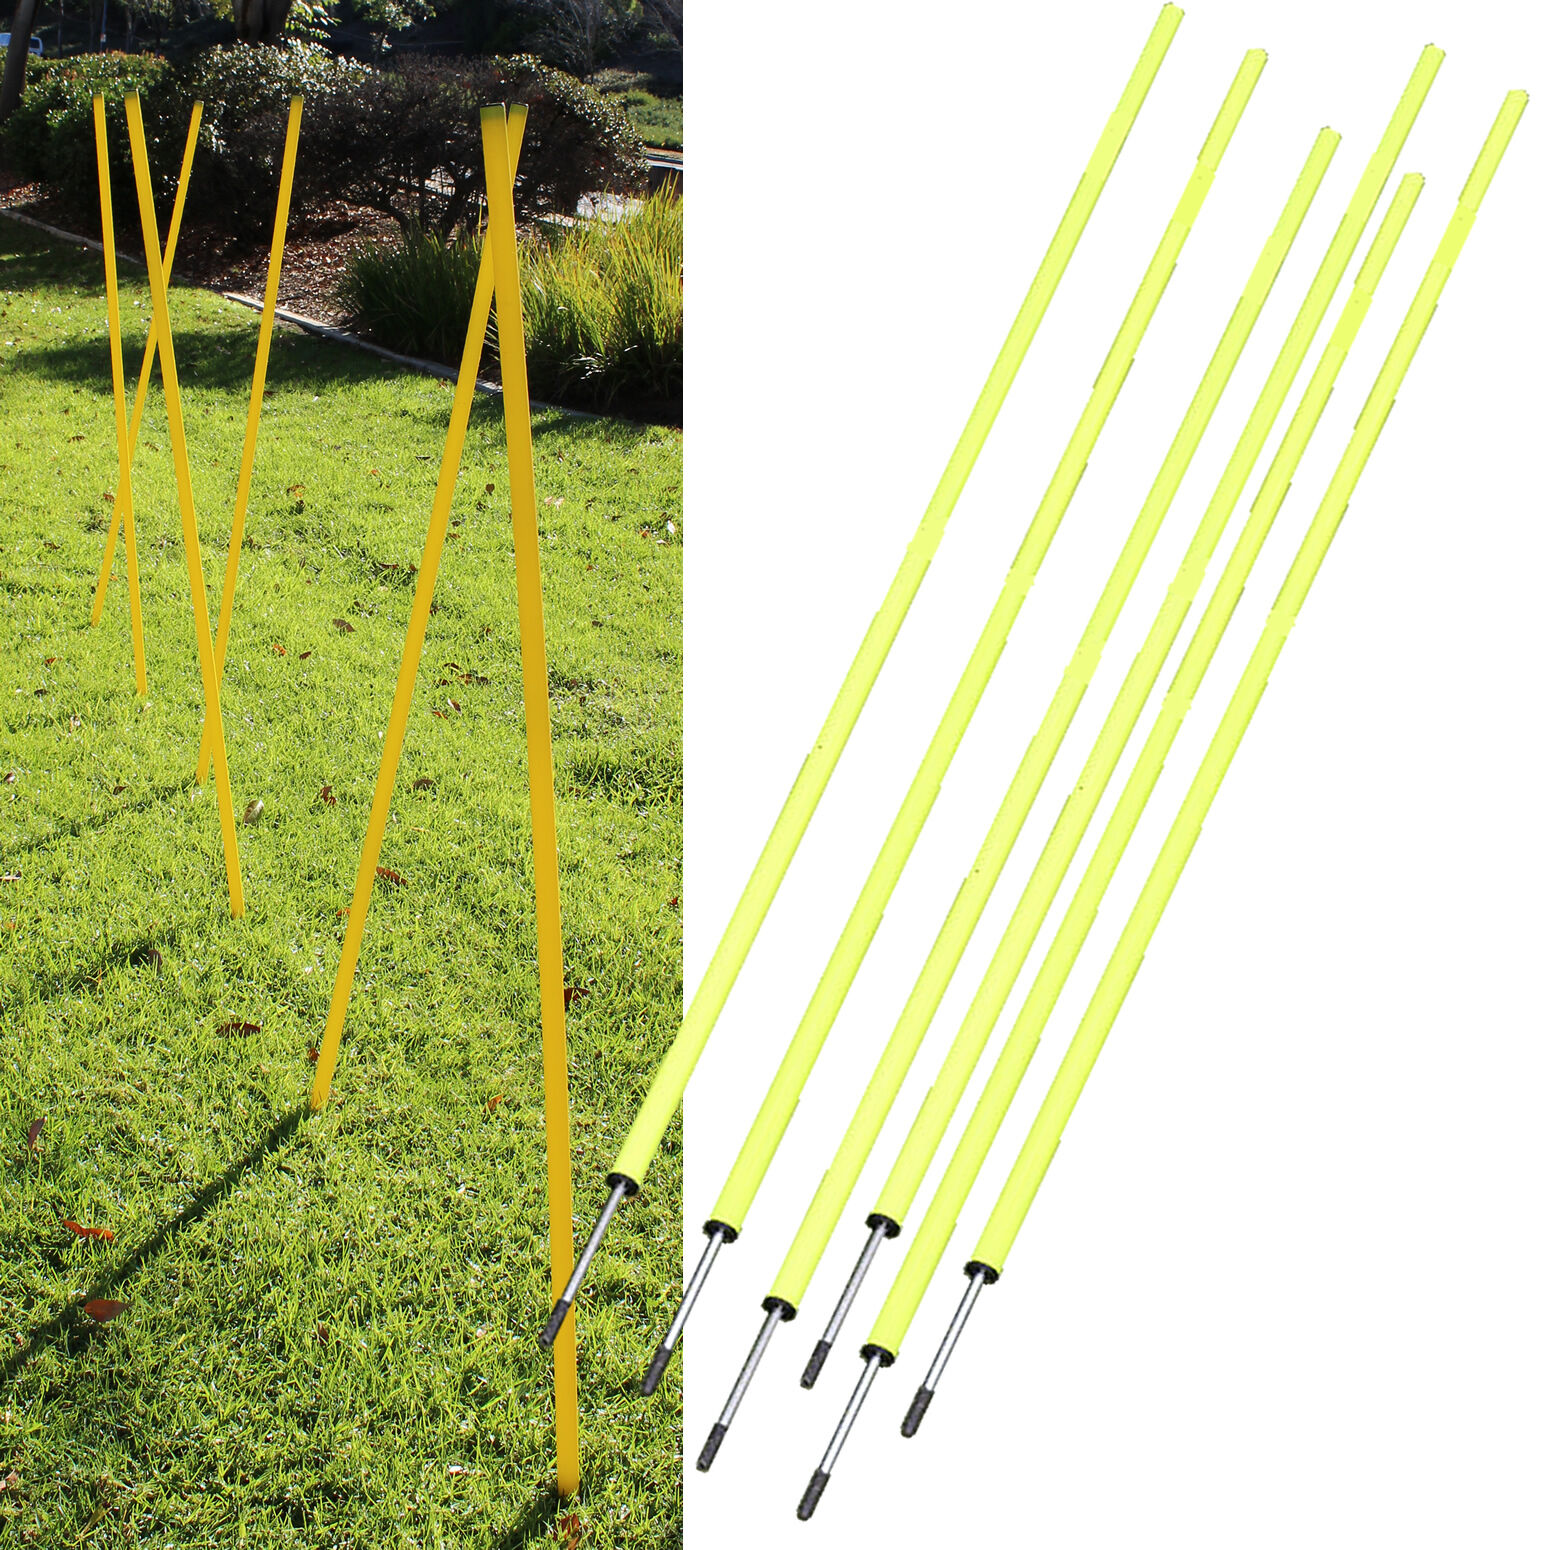 6 Agility Poles Portable Outdoor Training Markers Obstacle football soccer coach